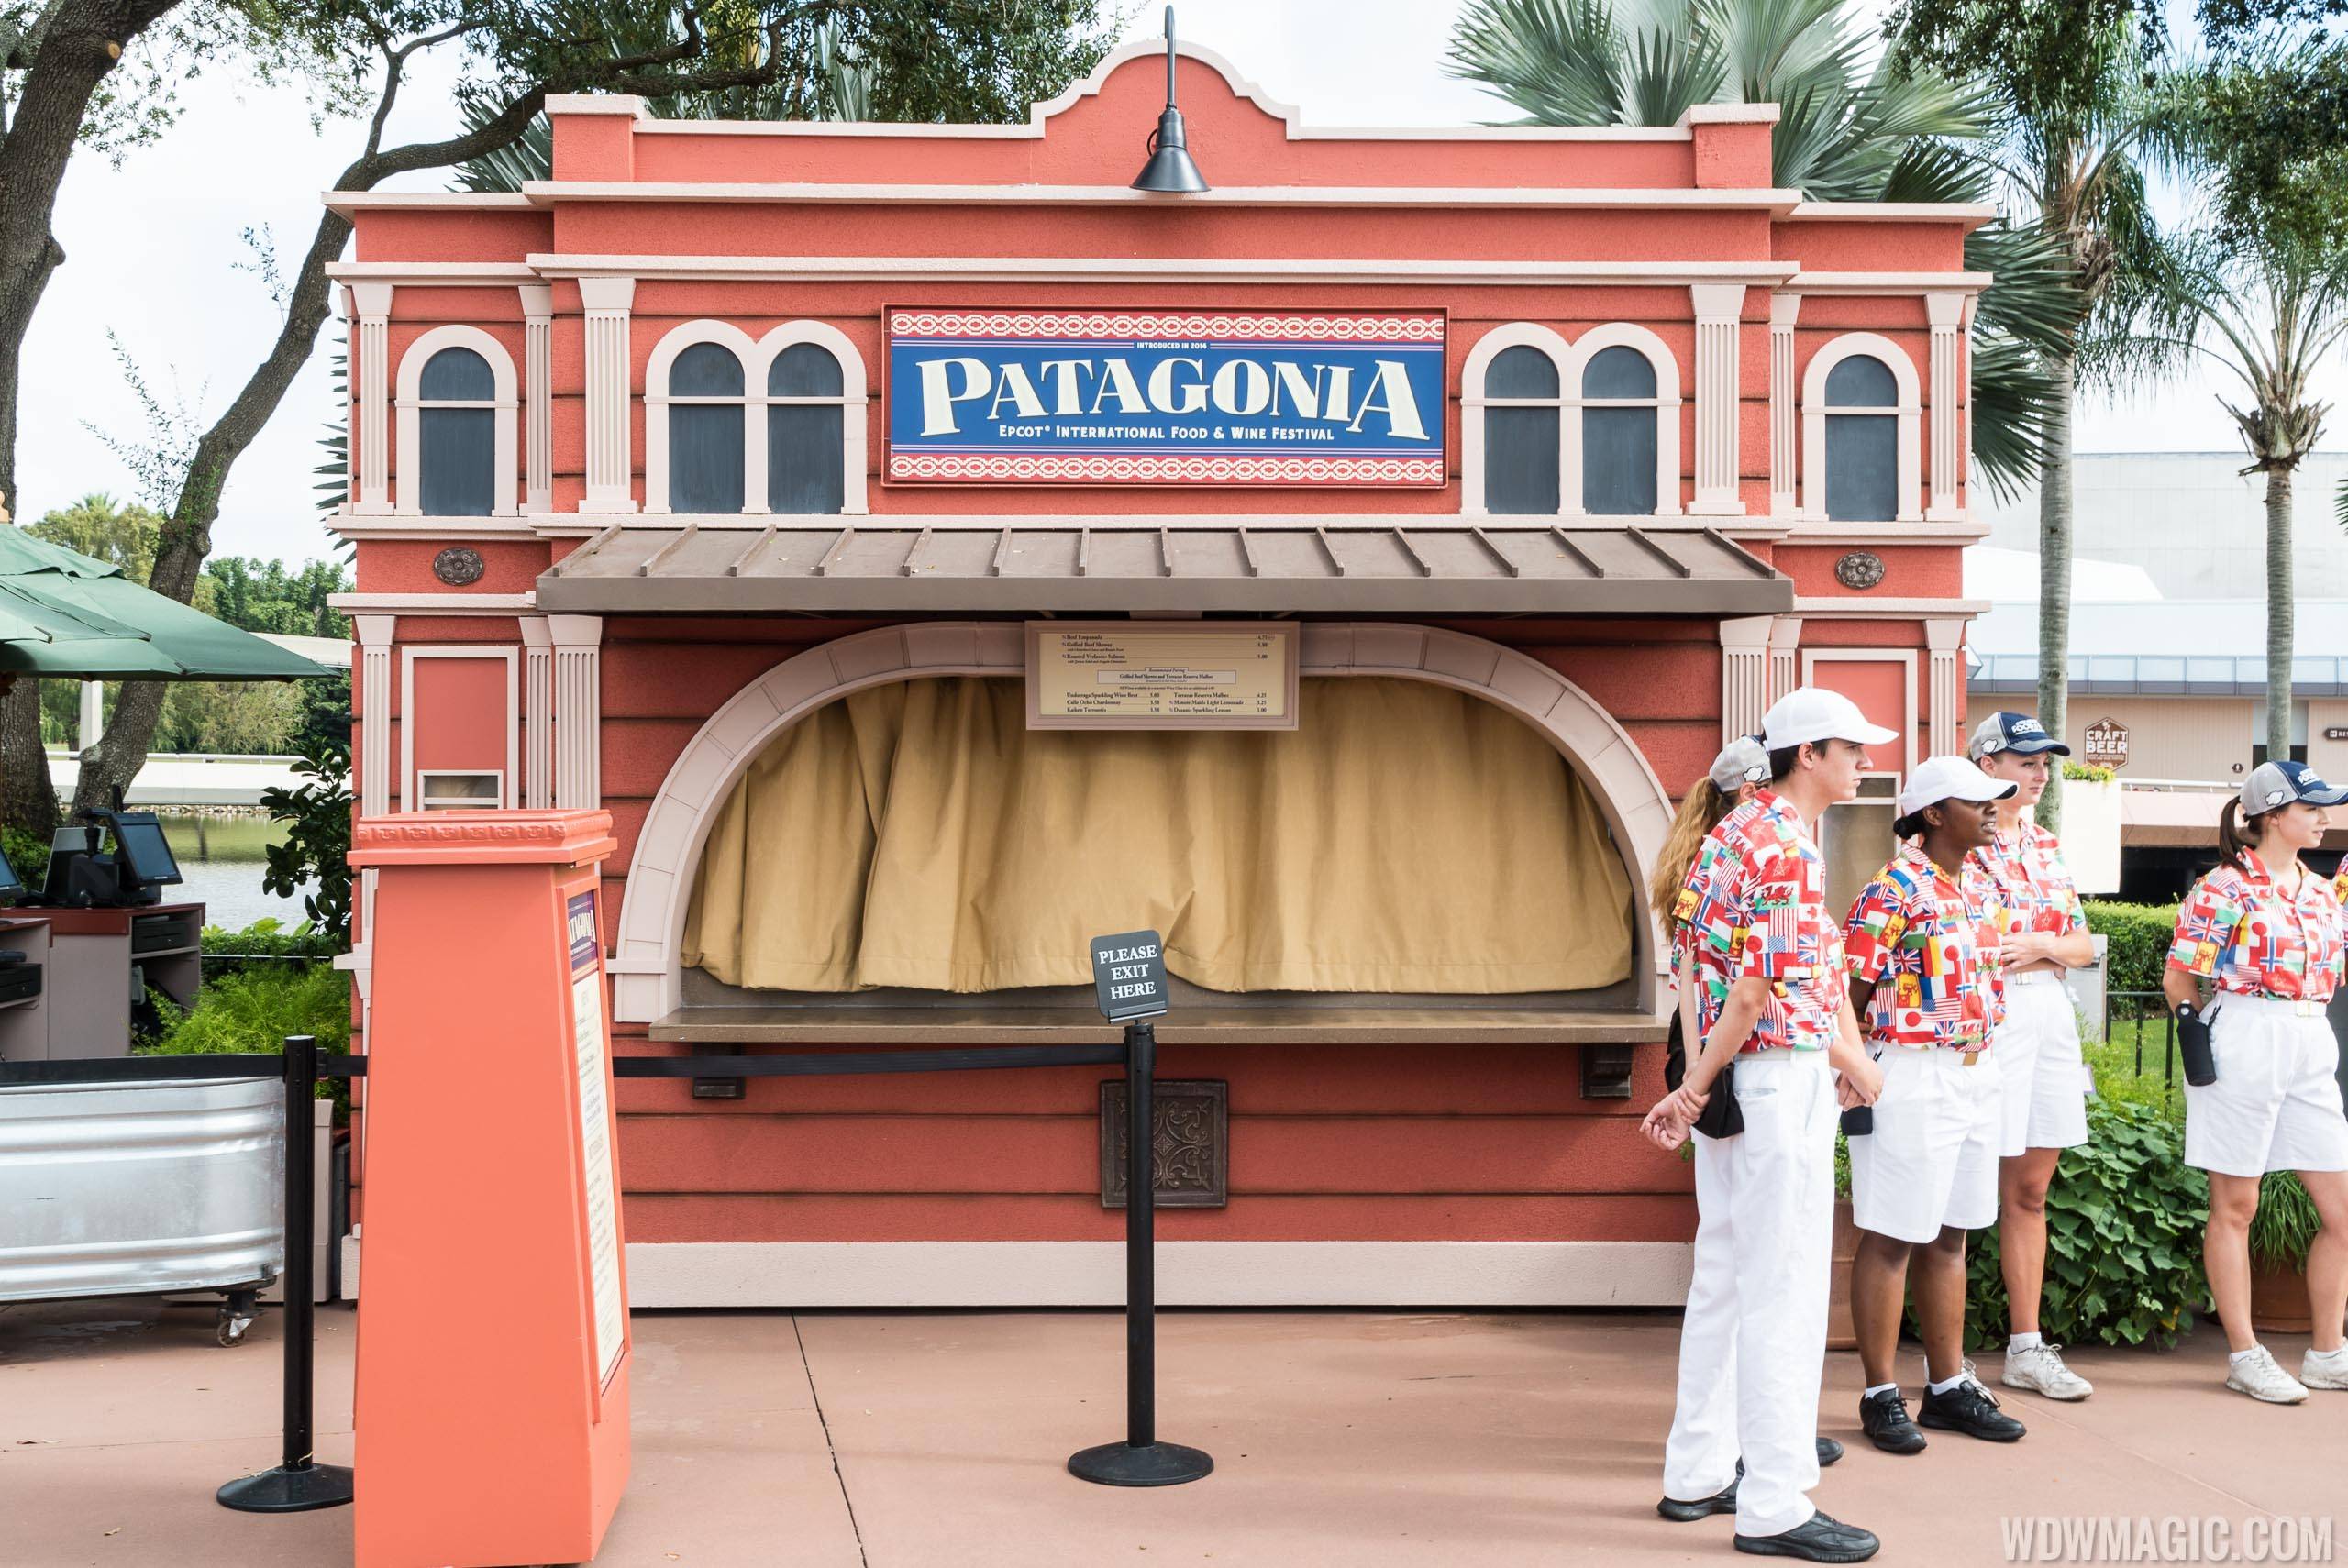 2015 Epcot Food and Wine Festival Marketplace kiosk - Patagonia